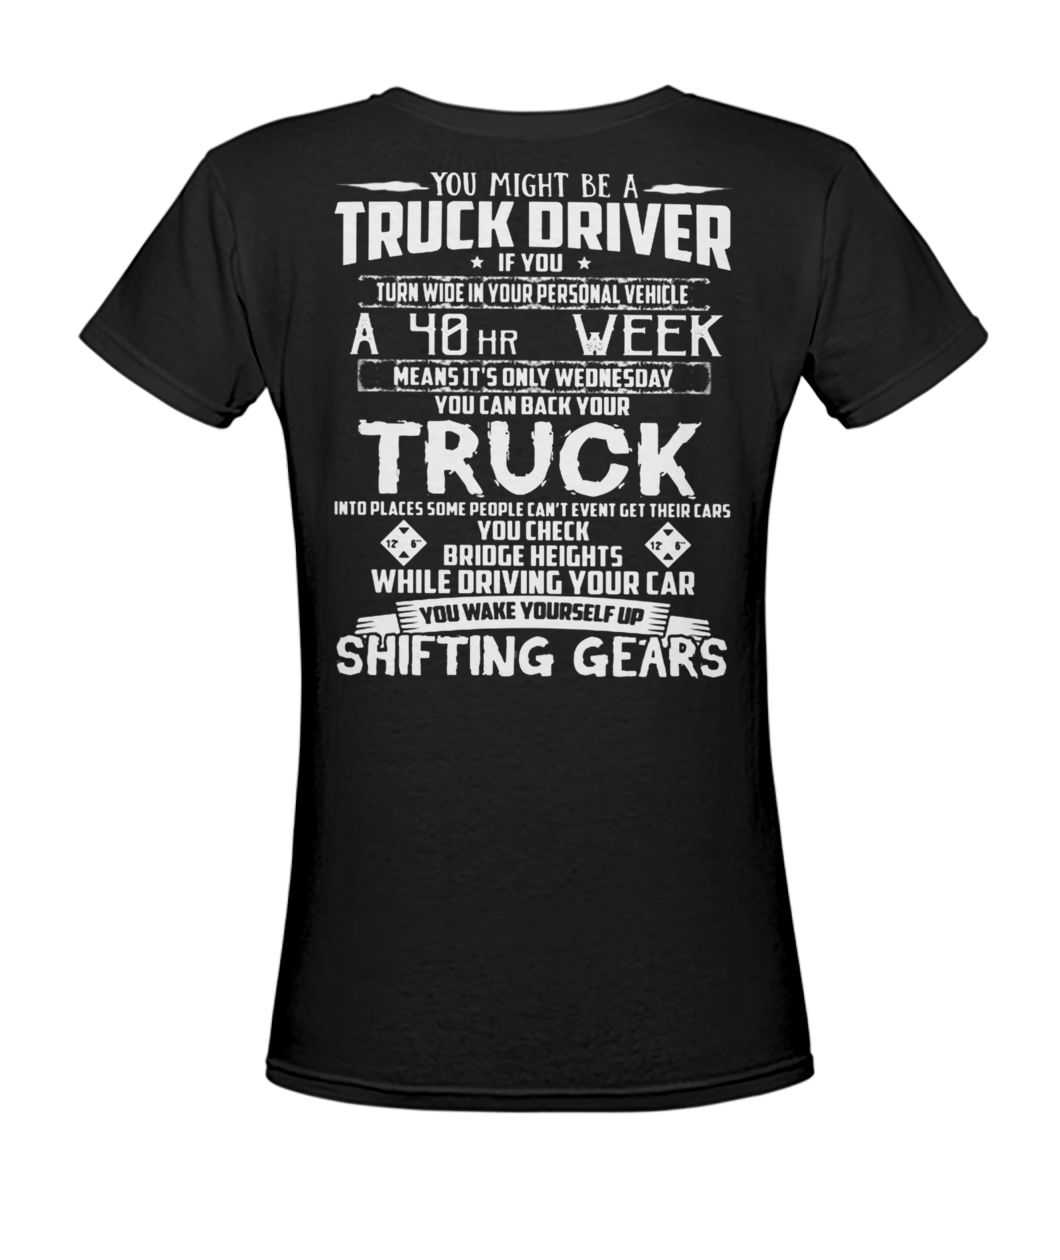 You might be a truck driver if you turn wide in your personal vehicle a 40hr week women's v-neck